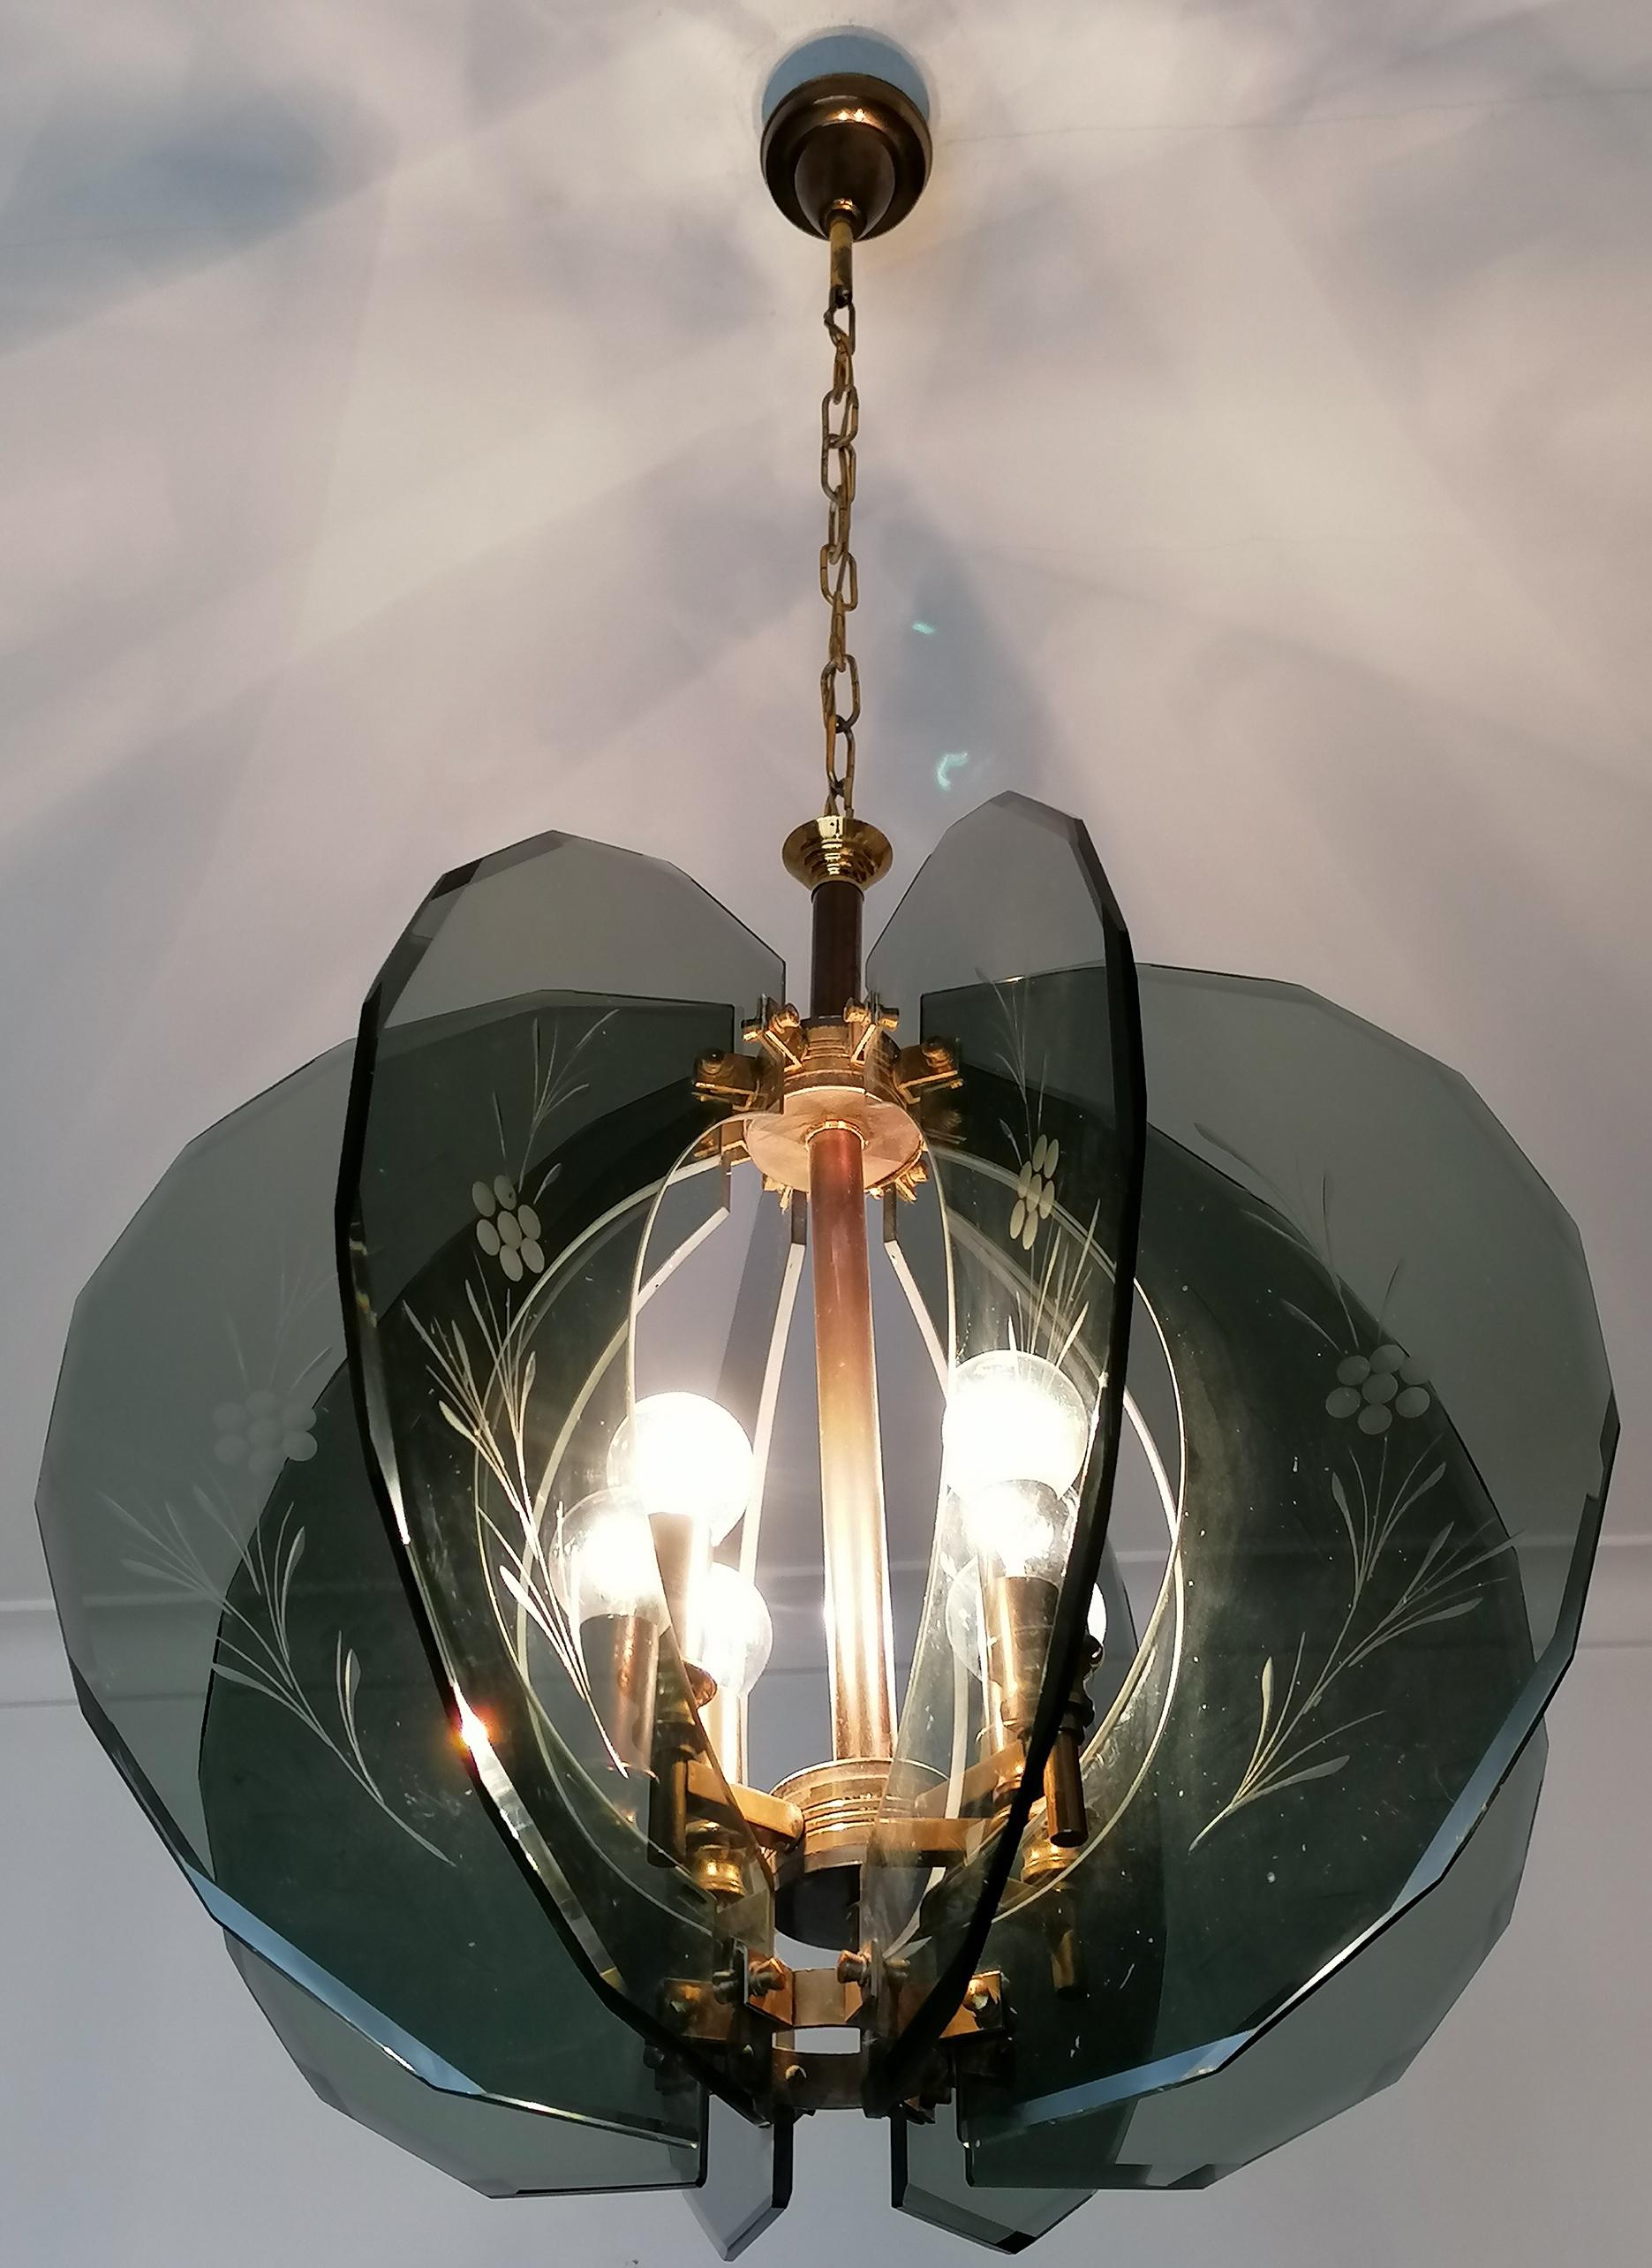 Vintage Gino Paroldo Chandelier with Brass and Smoked Hand Cut Glass, 1950s For Sale 6